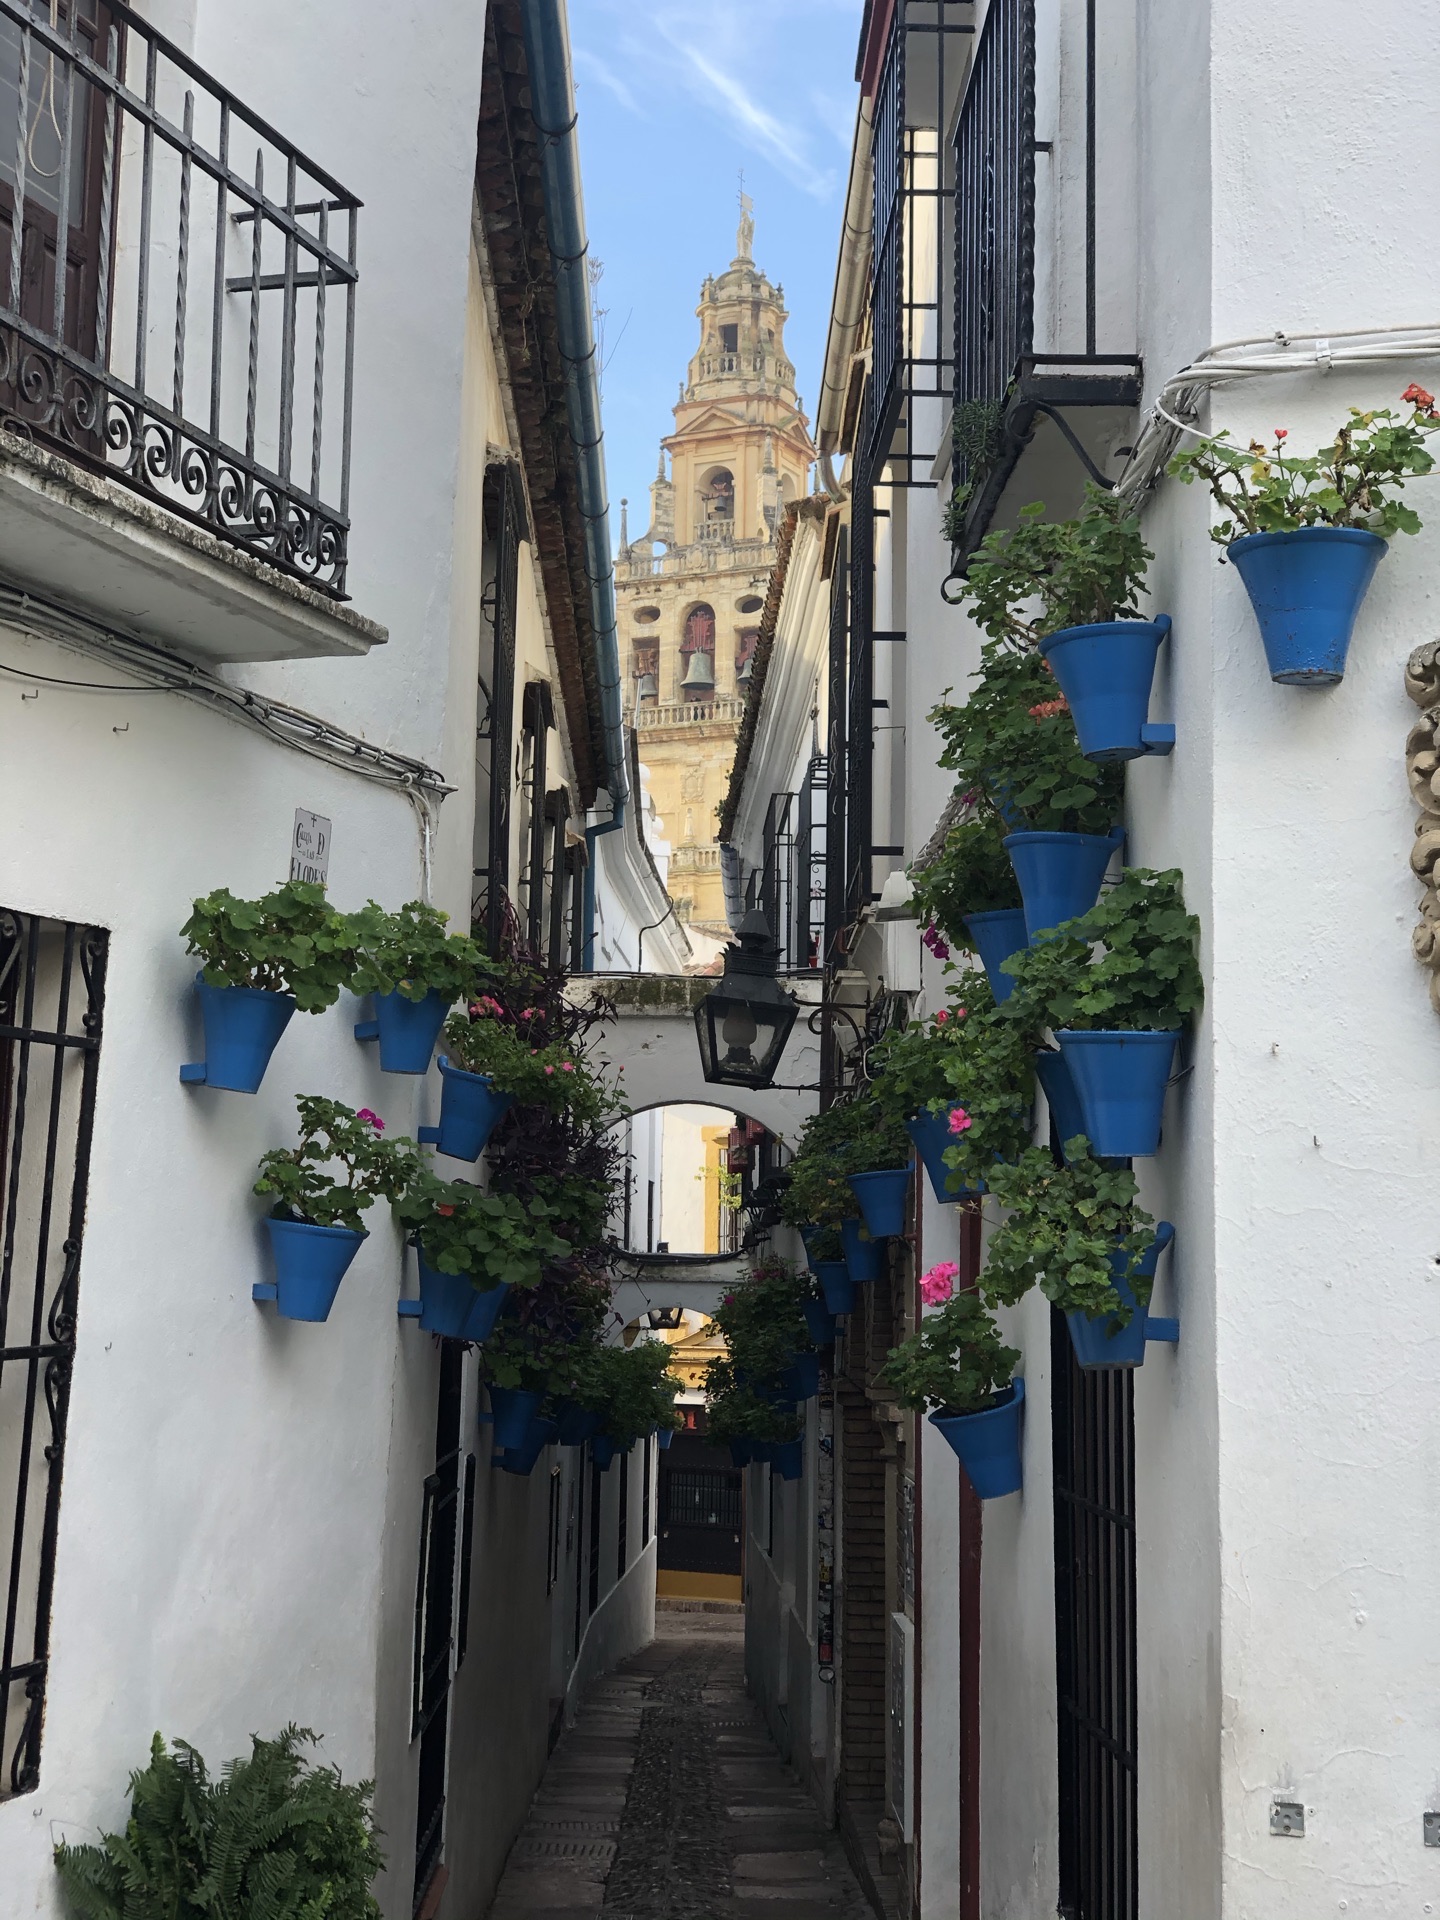 Calleja de las Flores attraction reviews - Calleja de las Flores tickets -  Calleja de las Flores discounts - Calleja de las Flores transportation,  address, opening hours - attractions, hotels, and food